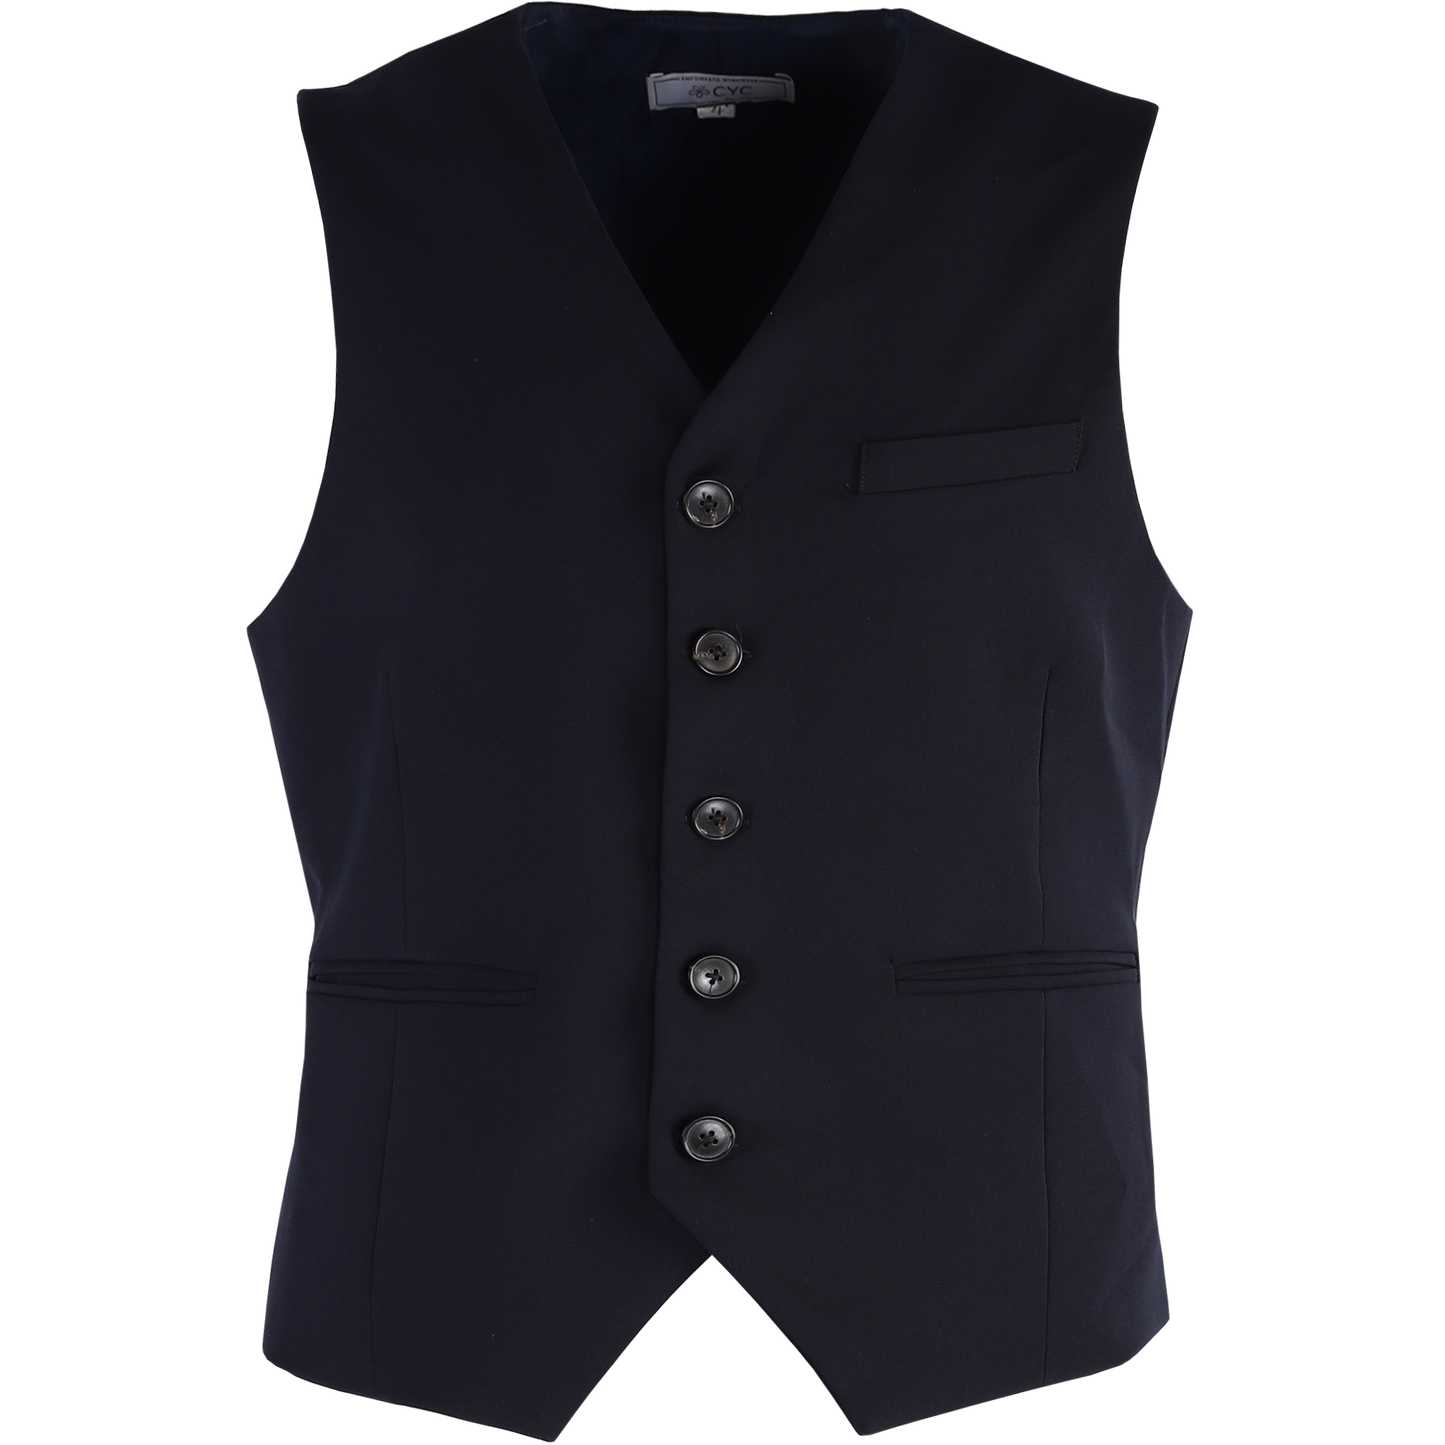 Navy Vest for Frontline Associates — Uniforms by CYC Corporate Label